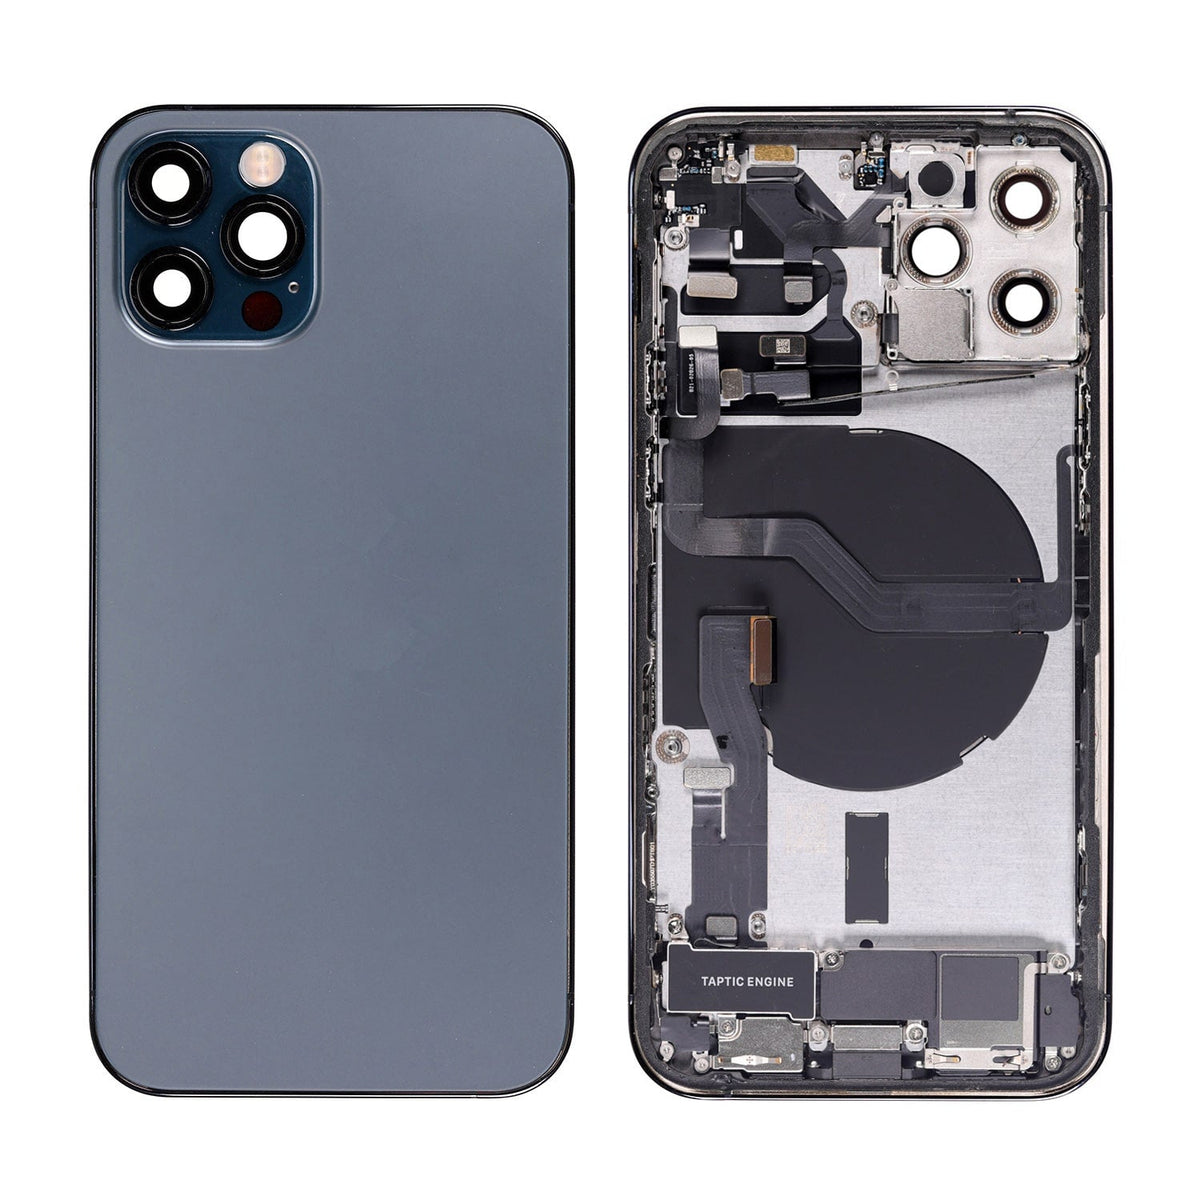 PACIFIC BLUE BACK COVER FULL ASSEMBLY  FOR IPHONE 12 PRO